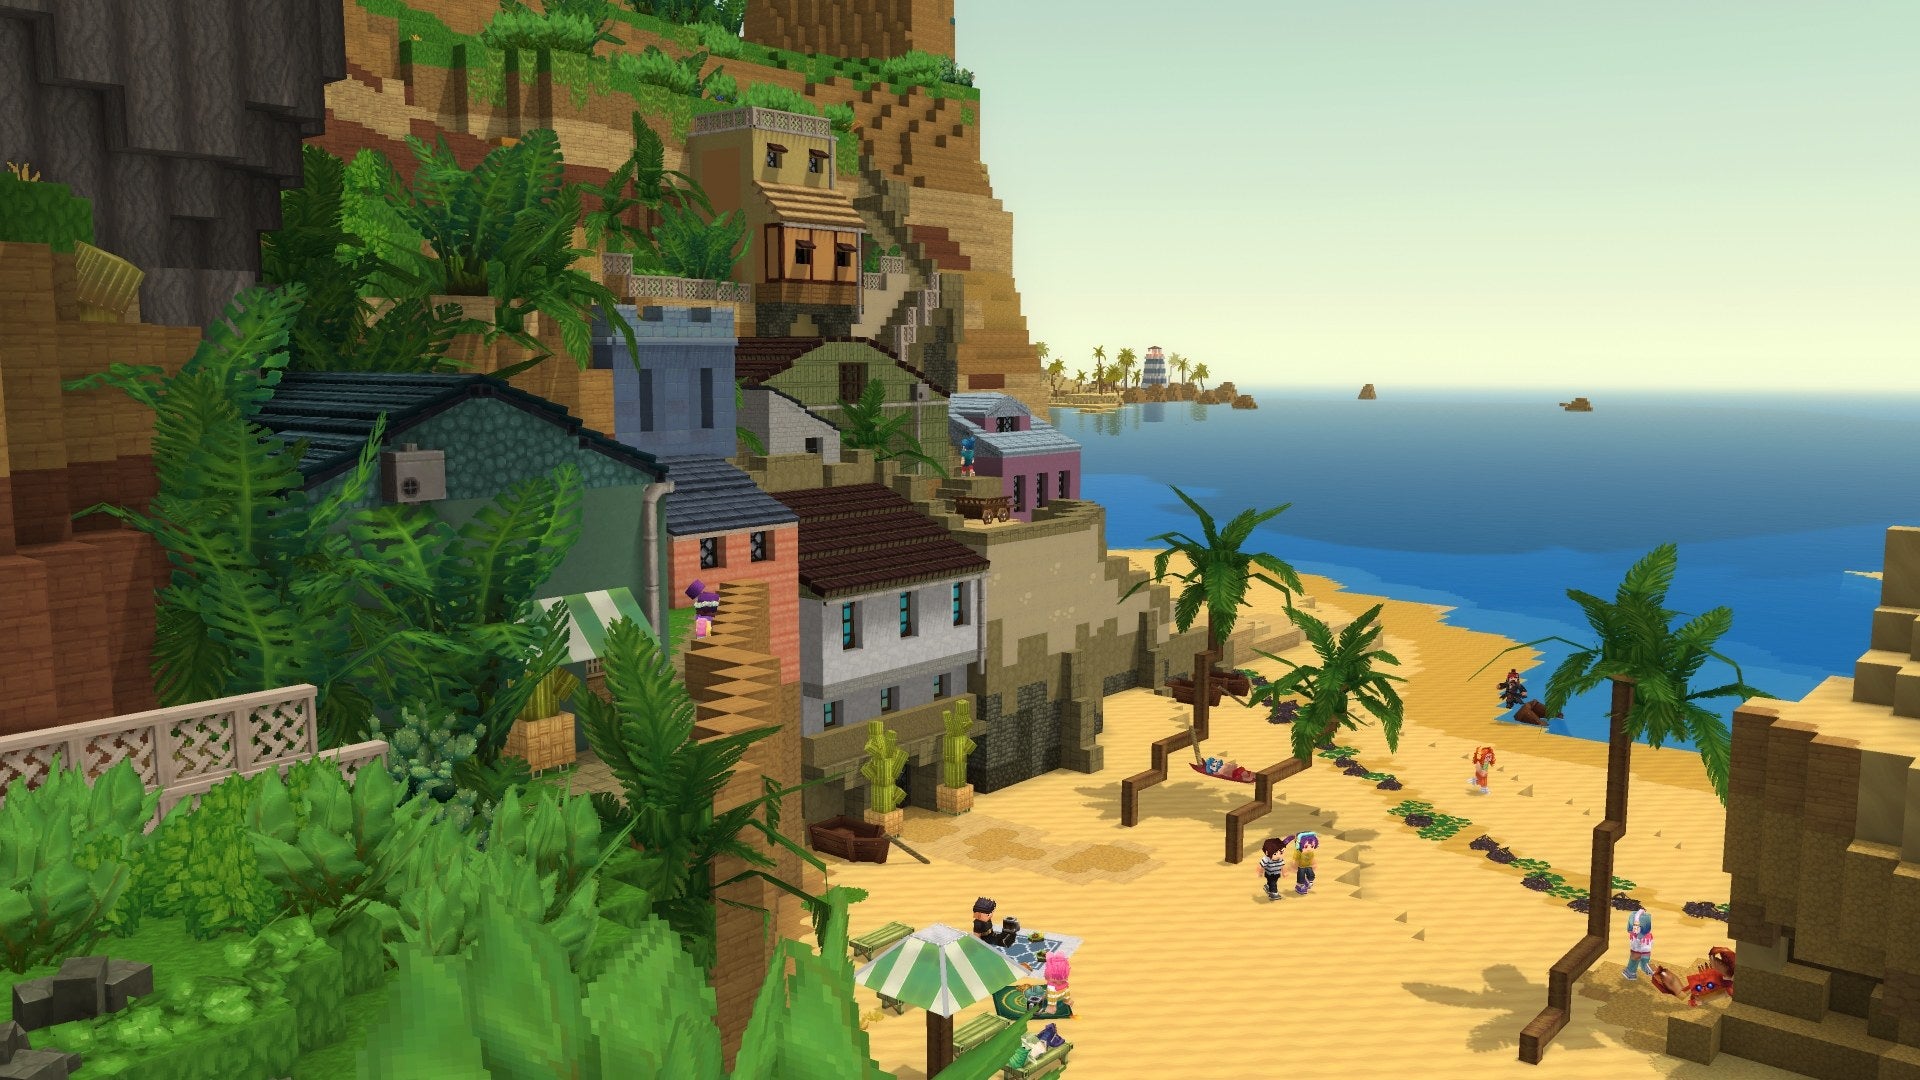 A beach with homes built into a cliffside, all made out of blocks in Hytale.